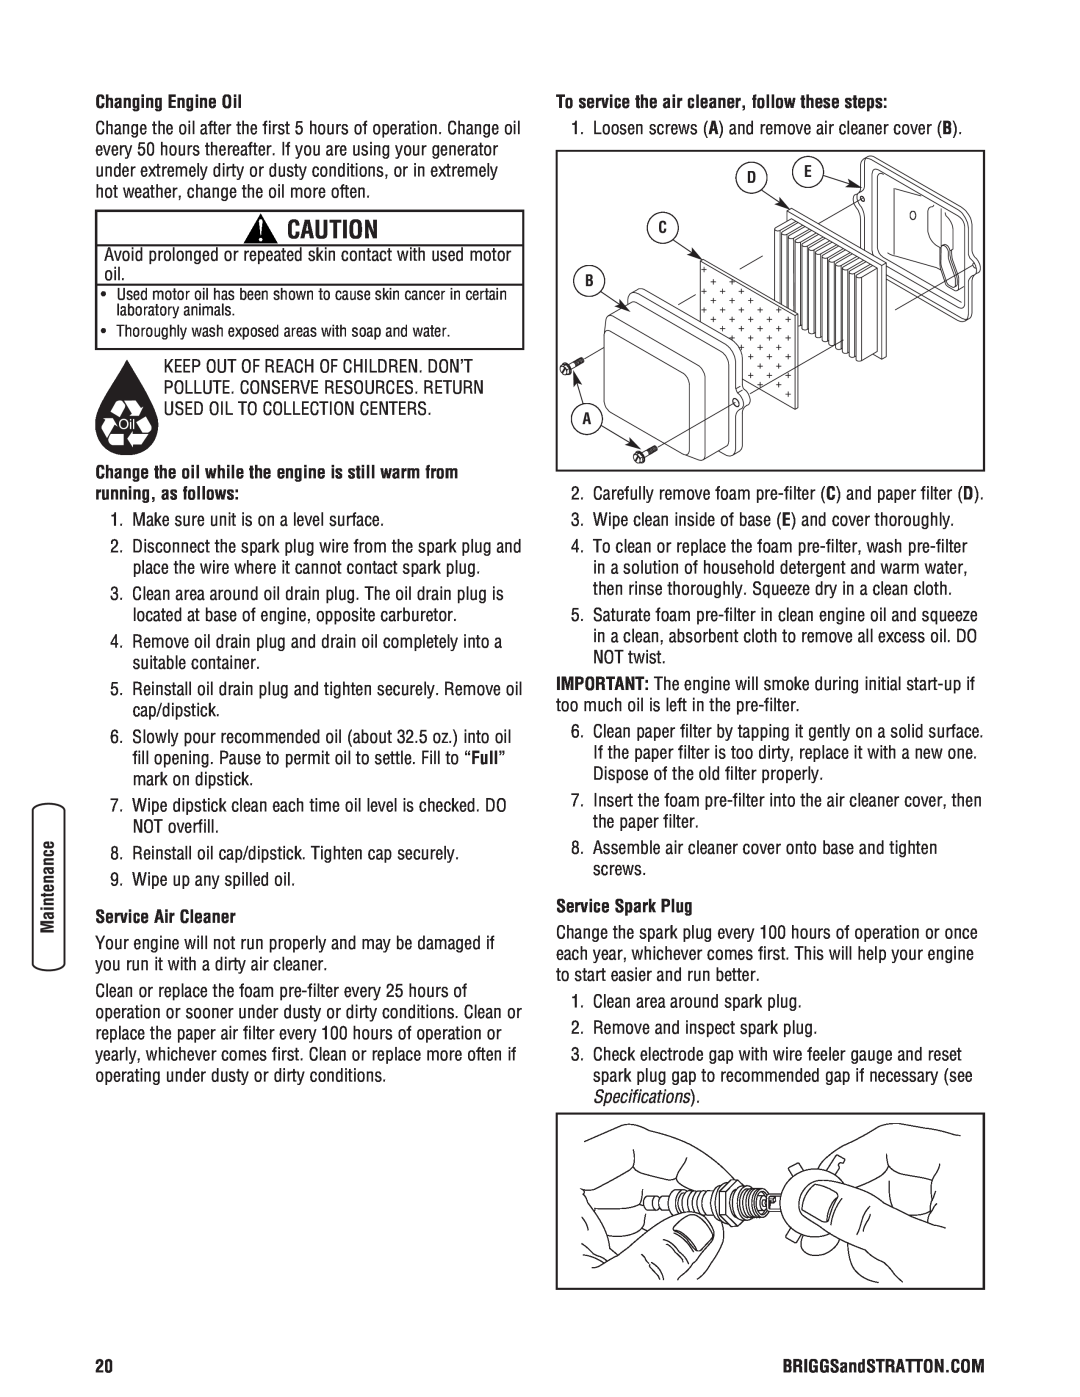 Briggs & Stratton 13500 manual Changing Engine Oil, Service Air Cleaner, To service the air cleaner, follow these steps 